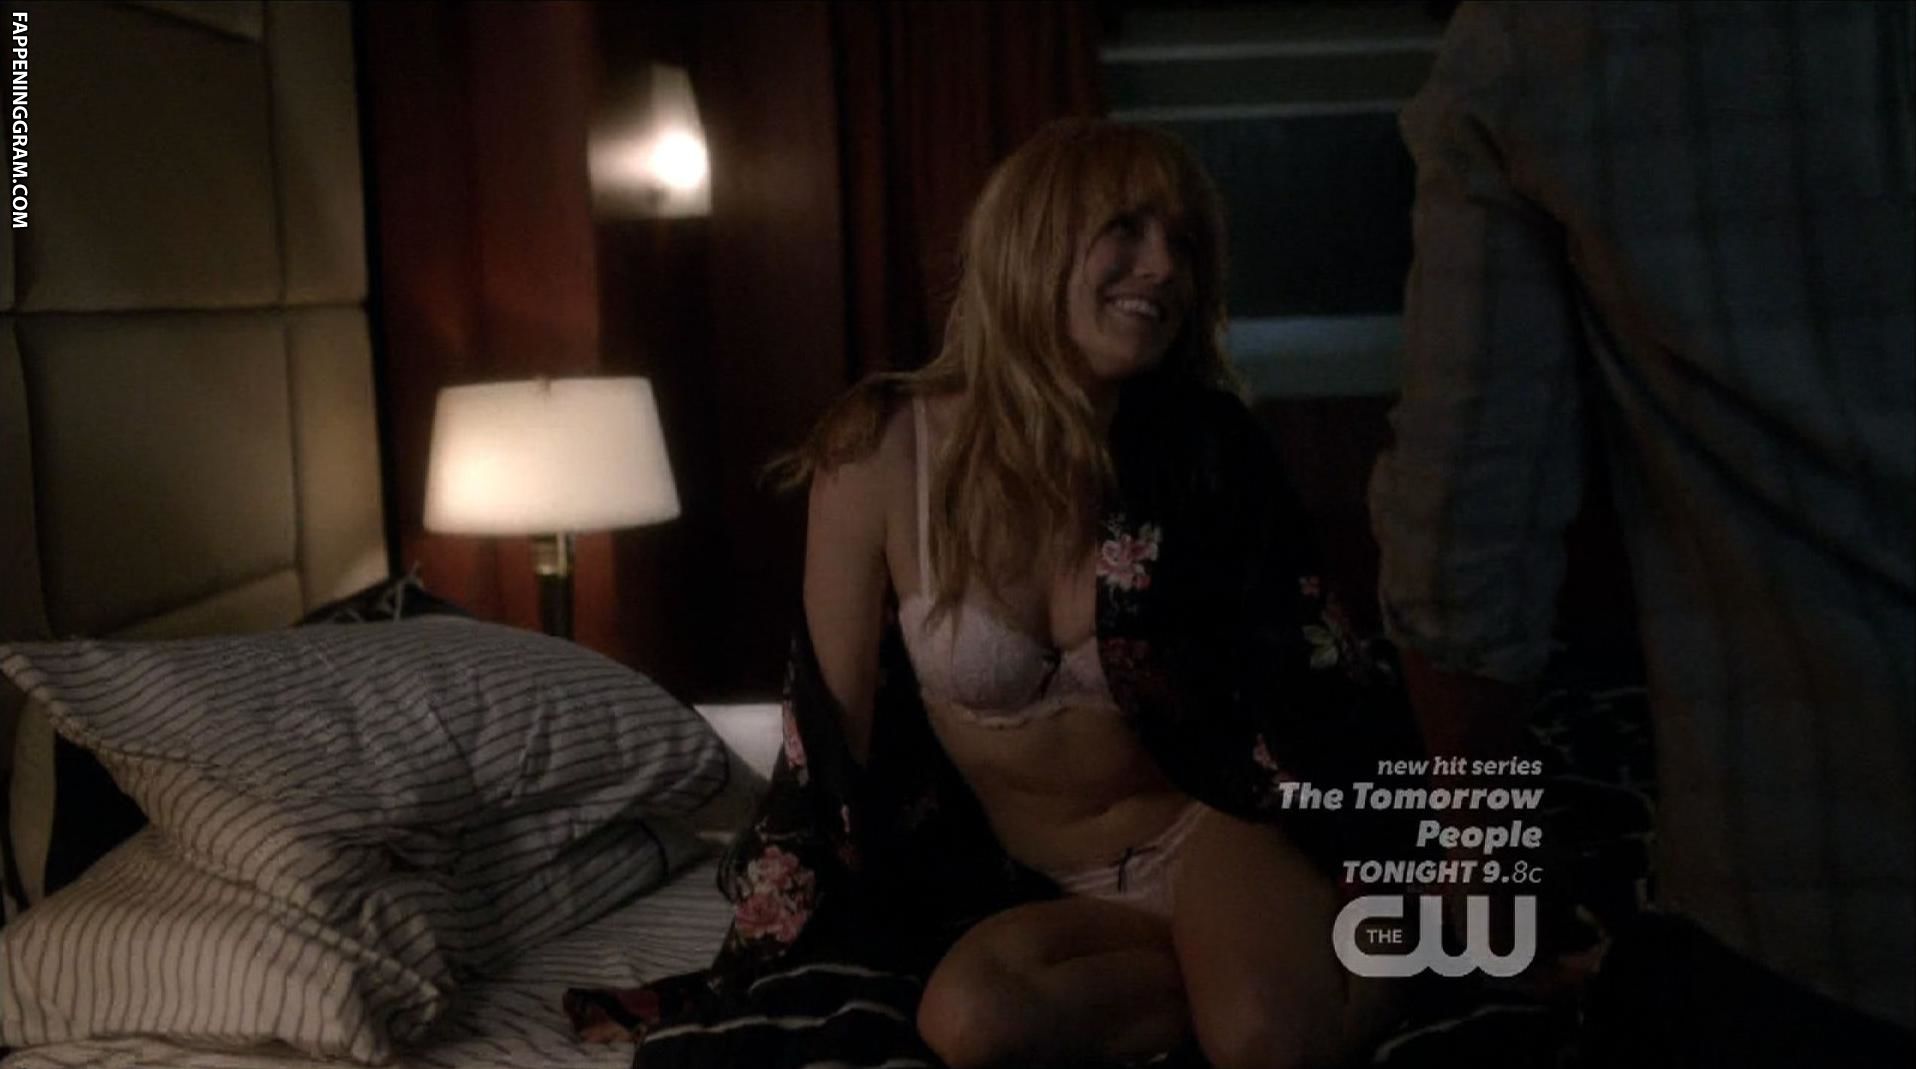 Caity lotz ever been nude